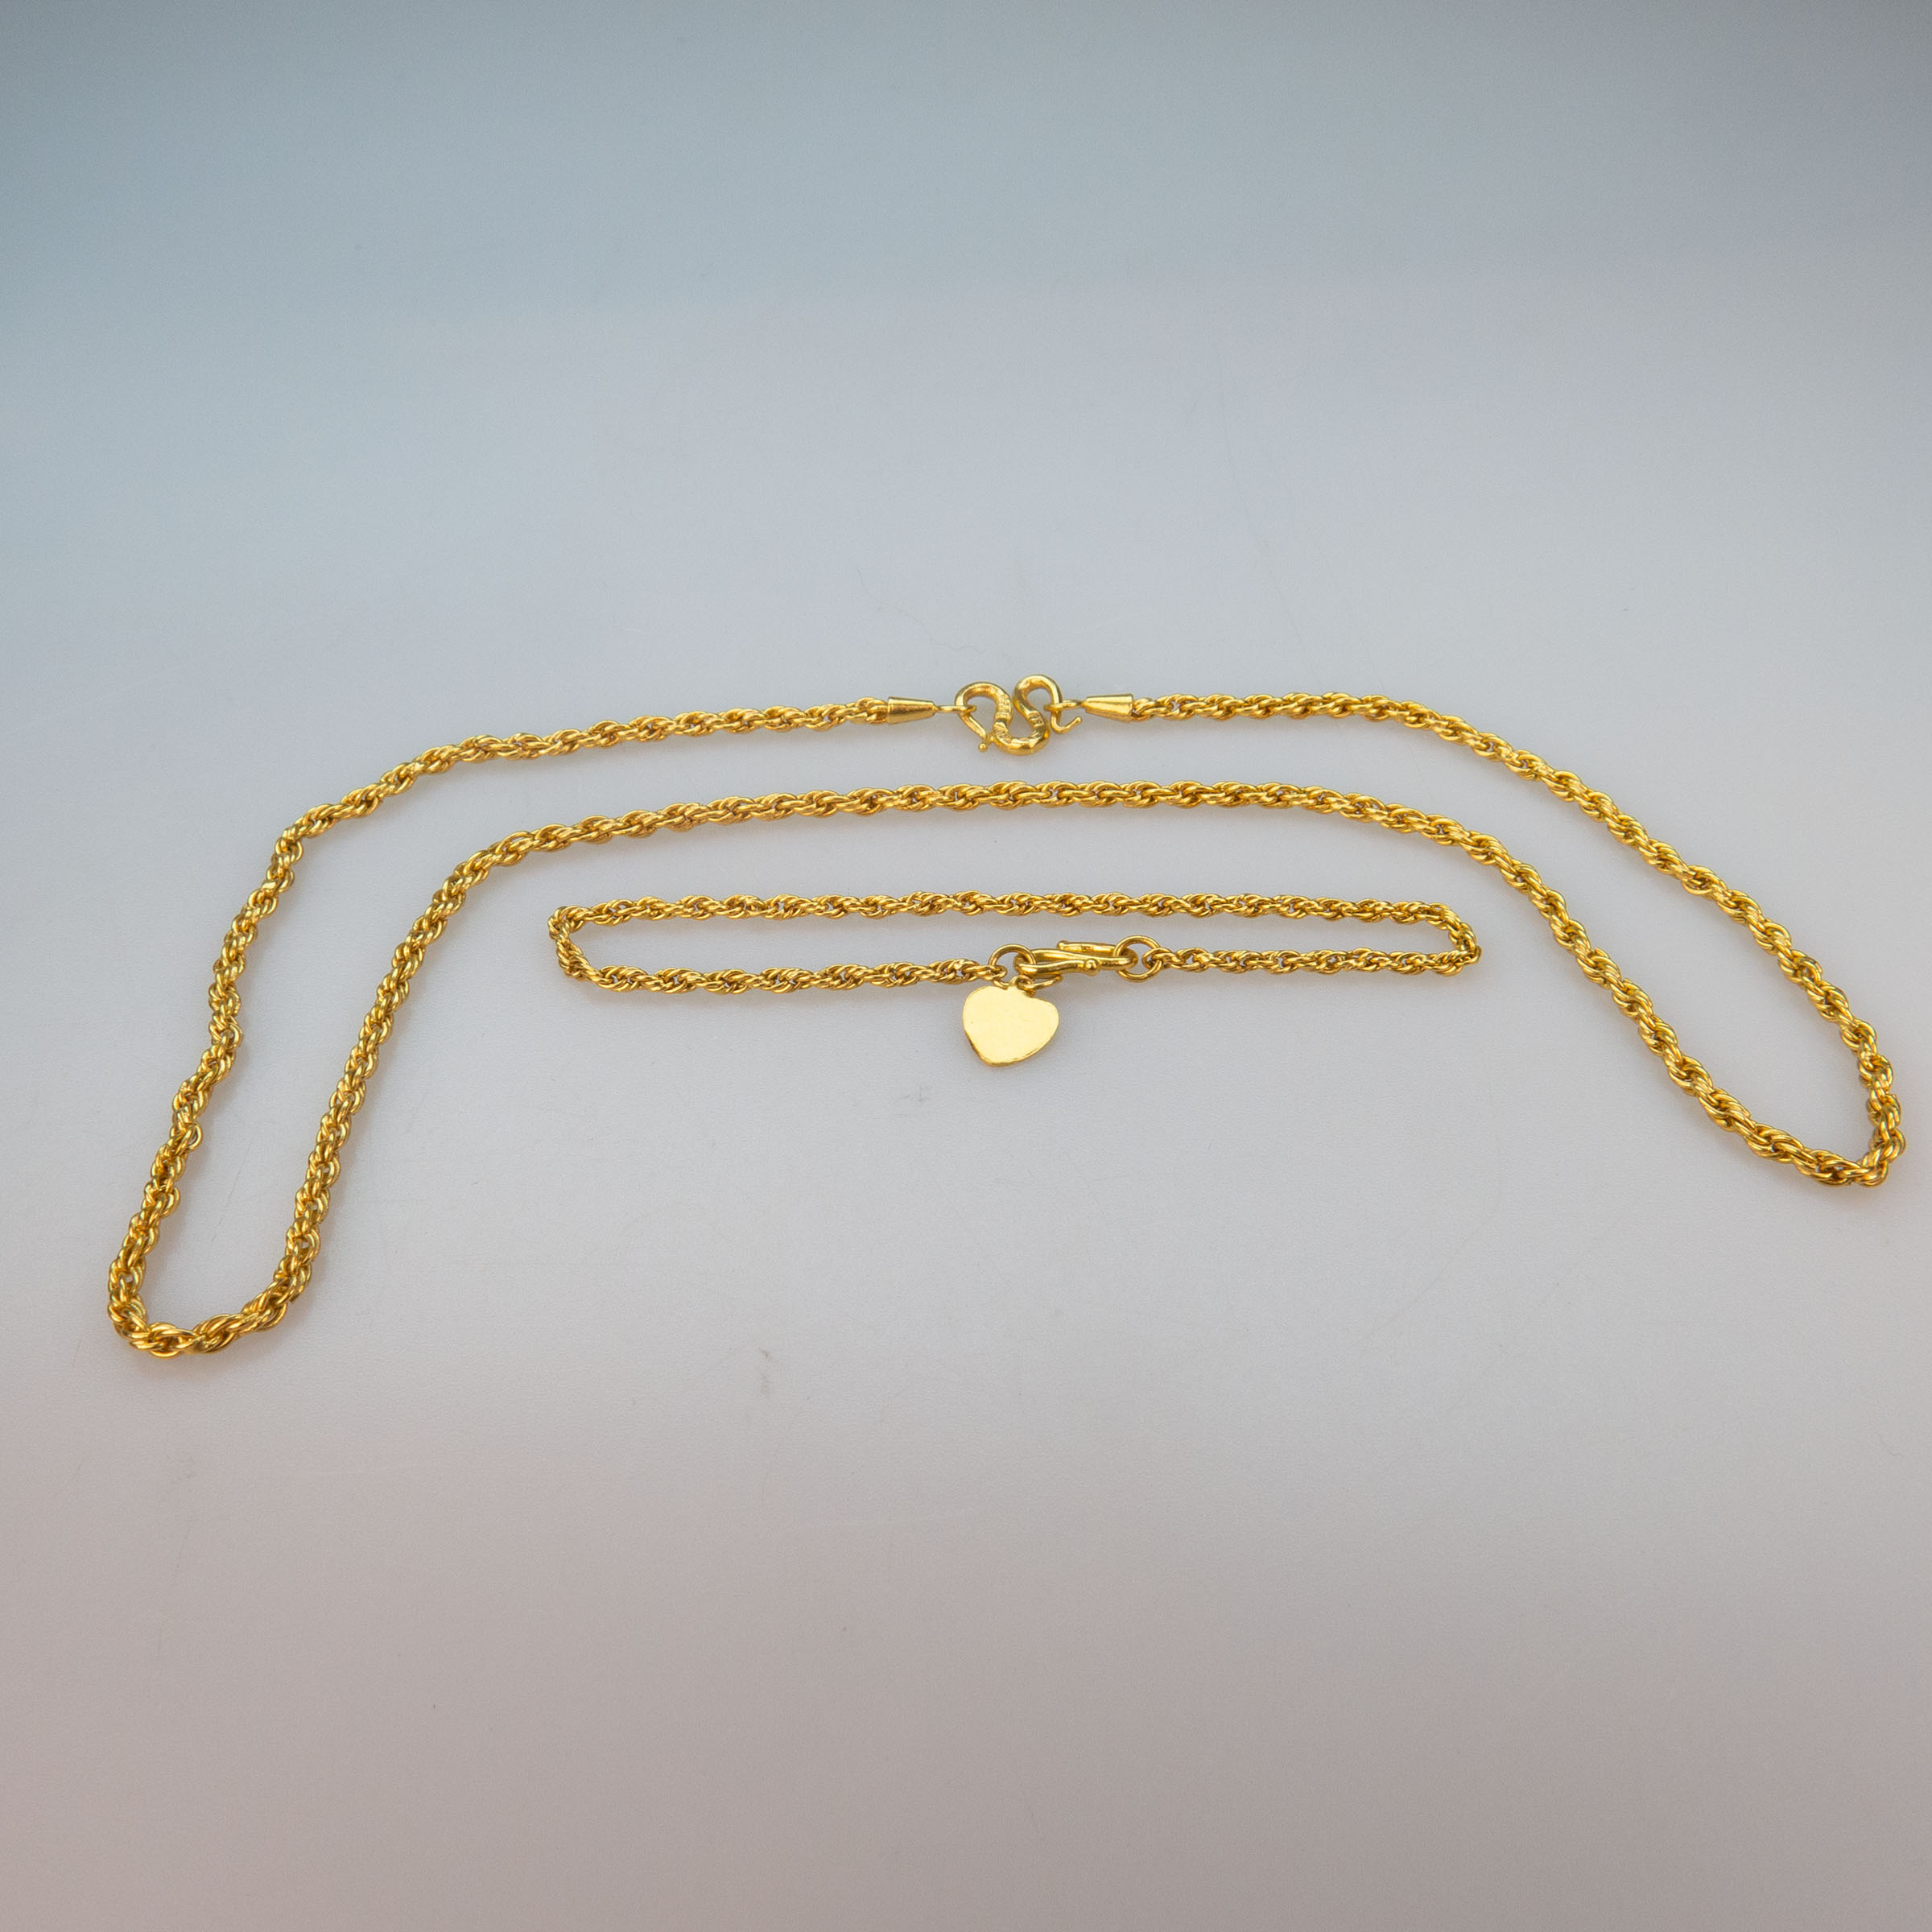 24k Yellow Gold Rope Chain And Bracelet